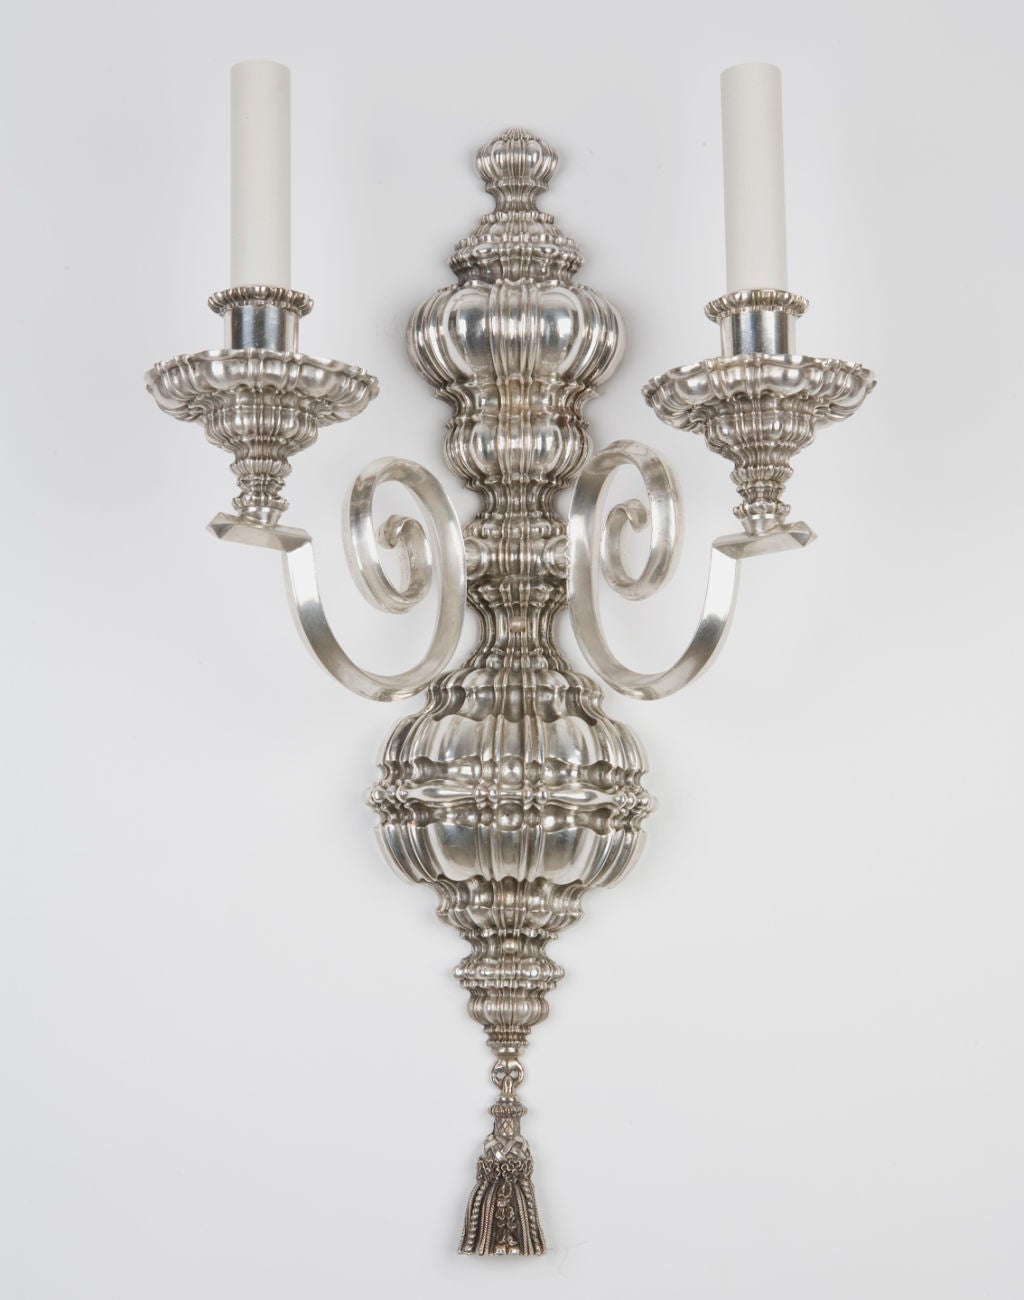 AIS2411

A pair of double light sconces in their original silver finish having deeply figured gathered-drapery waxpans and backplates and scrolling diamond-section arms. By the New York maker E. F. Caldwell.

Backplate: 21